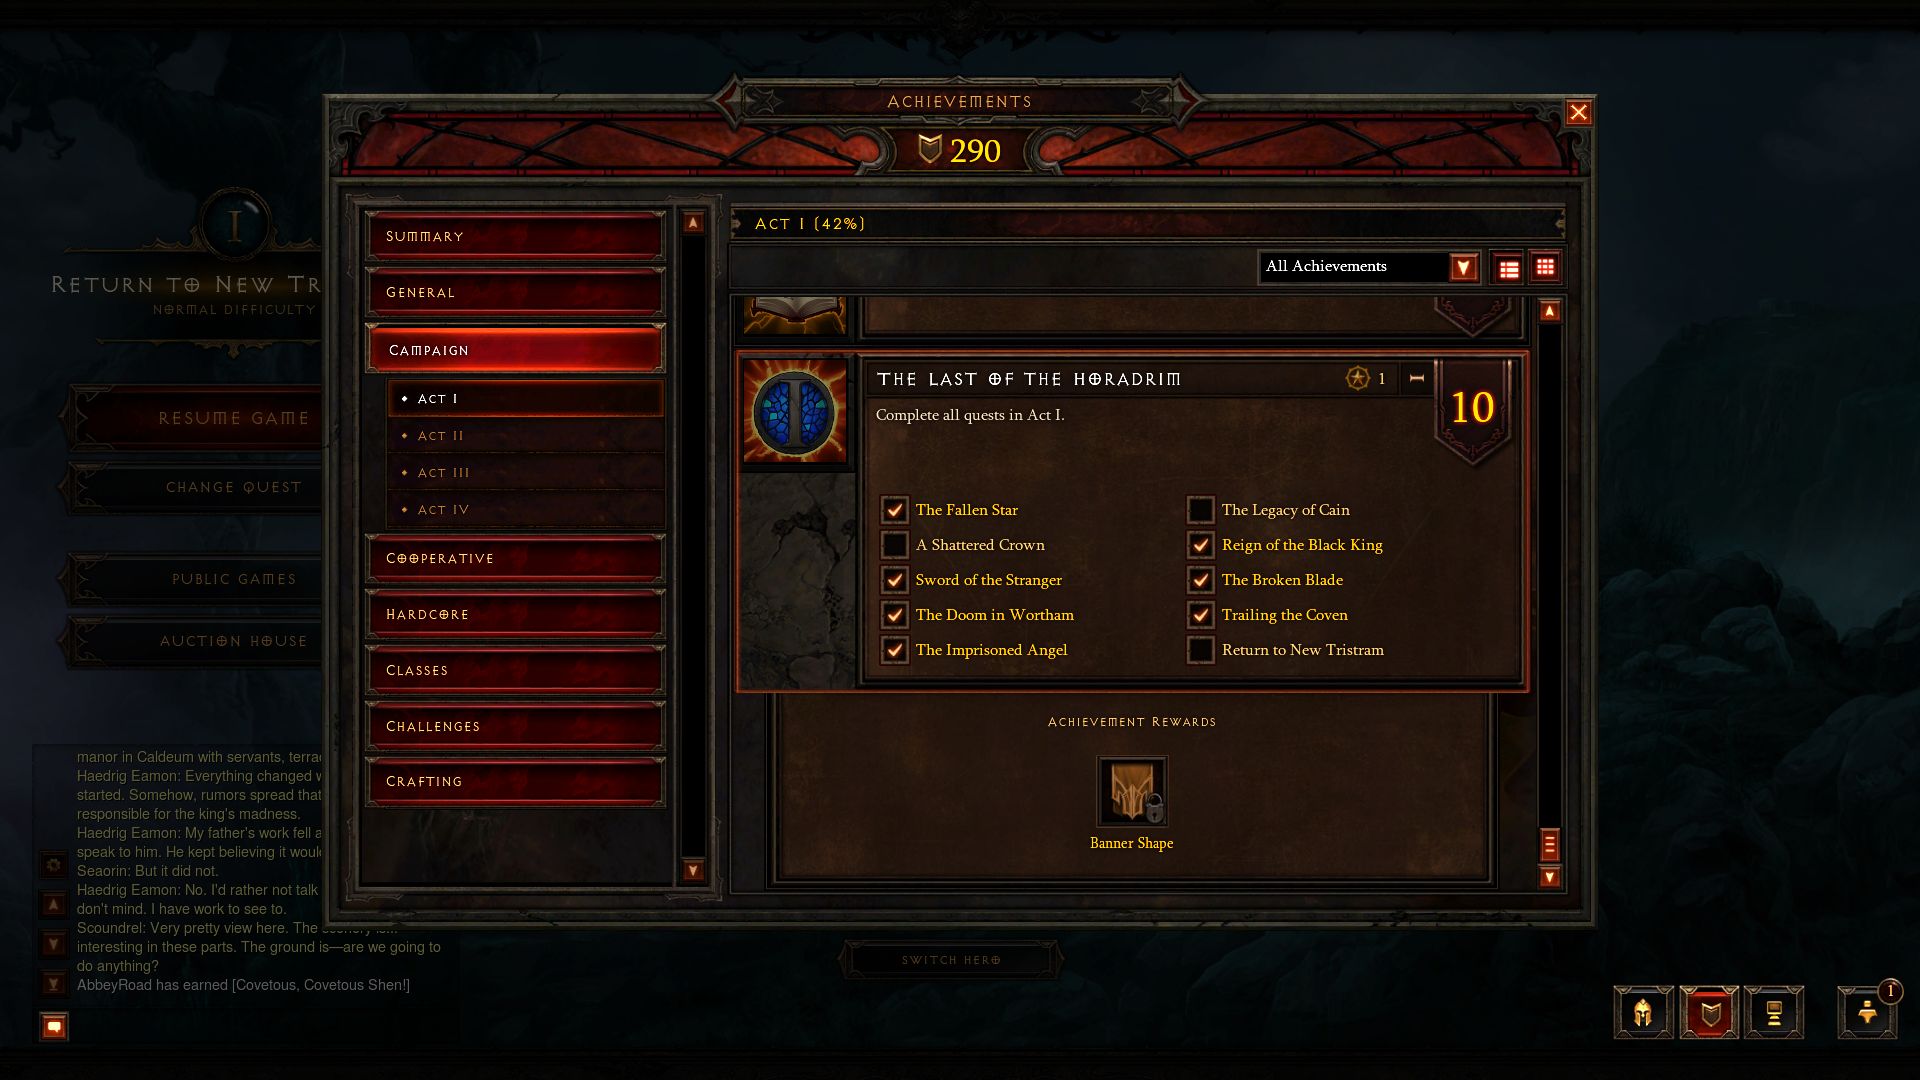 diablo 3 - Quests not marked as completed under achievements? - Arqade